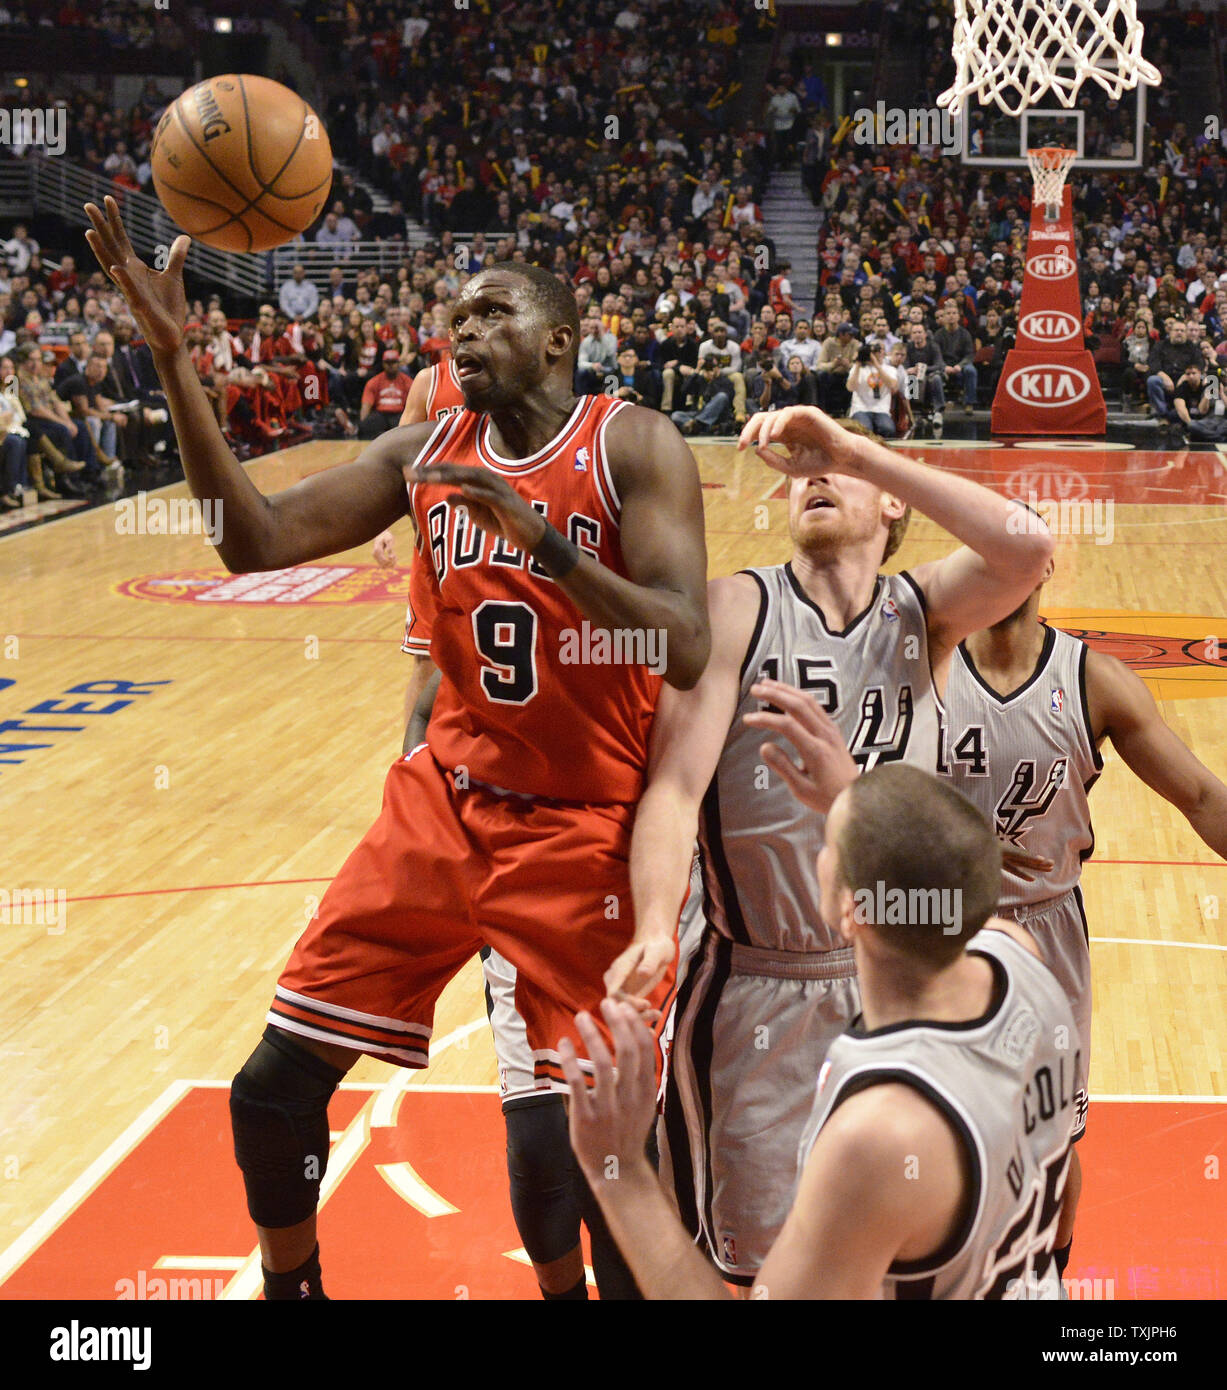 https://c8.alamy.com/comp/TXJPH6/chicago-bulls-small-forward-luol-deng-grabs-a-rebound-from-san-antonio-spurs-power-forward-matt-bonner-l-during-the-first-half-at-the-united-center-in-chicago-on-february-11-2013-upibrian-kersey-TXJPH6.jpg